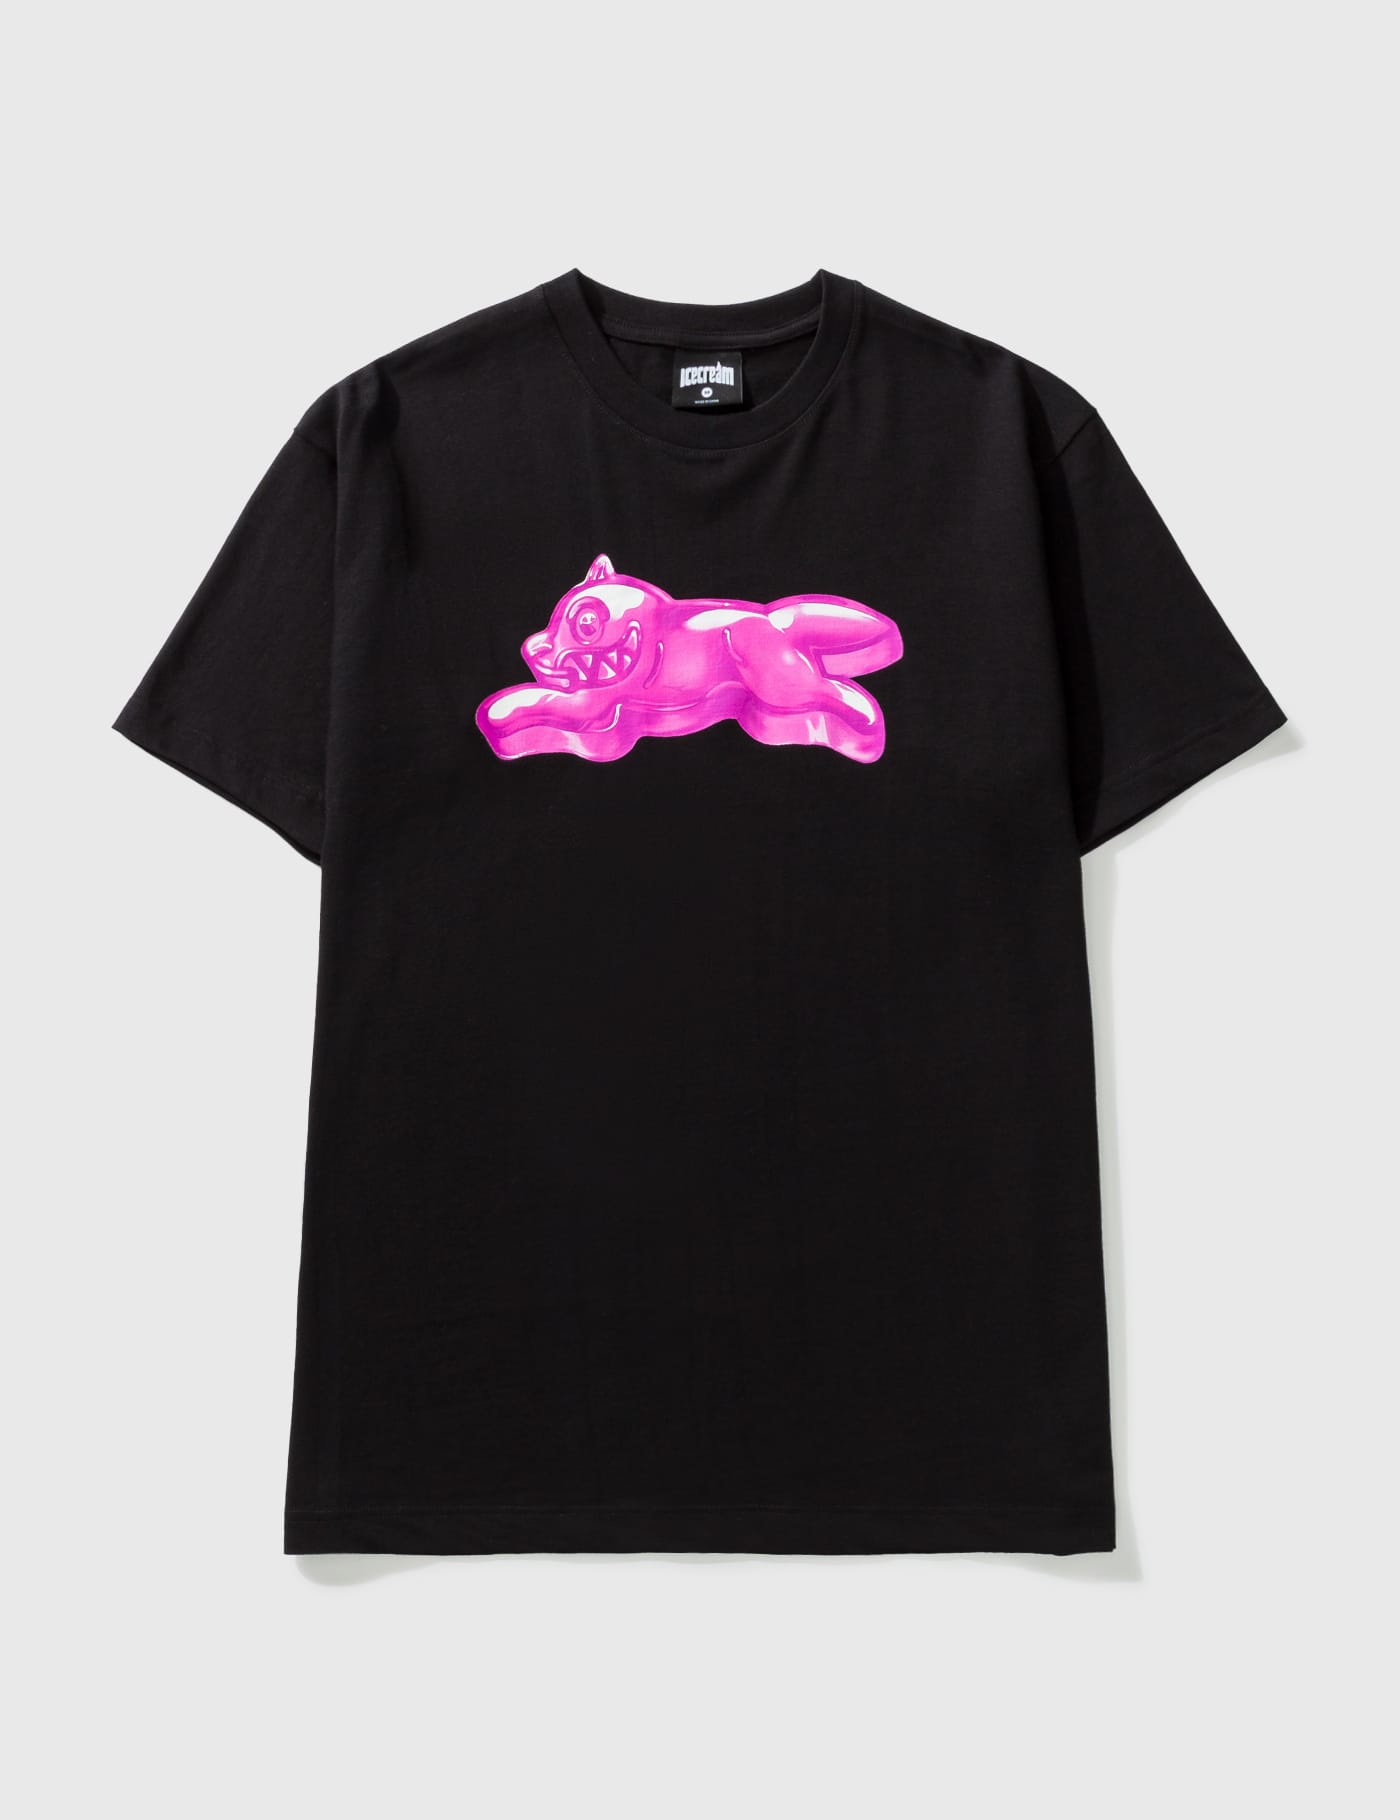 Icecream - Gummy T-shirt | HBX - Globally Curated Fashion and